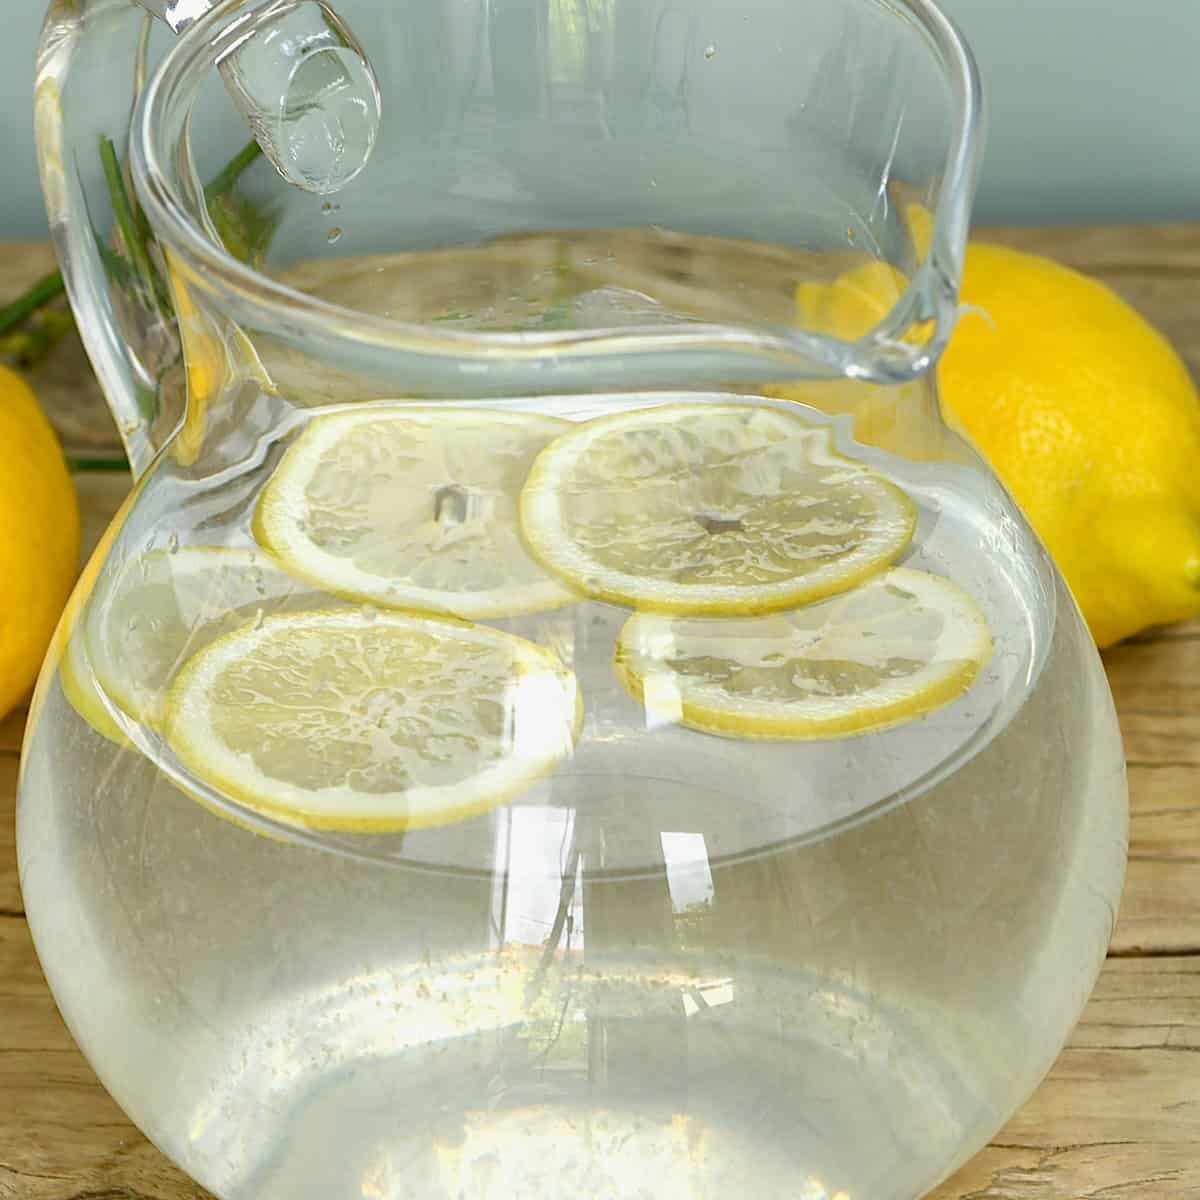 How to Make Lemon Water - Alphafoodie